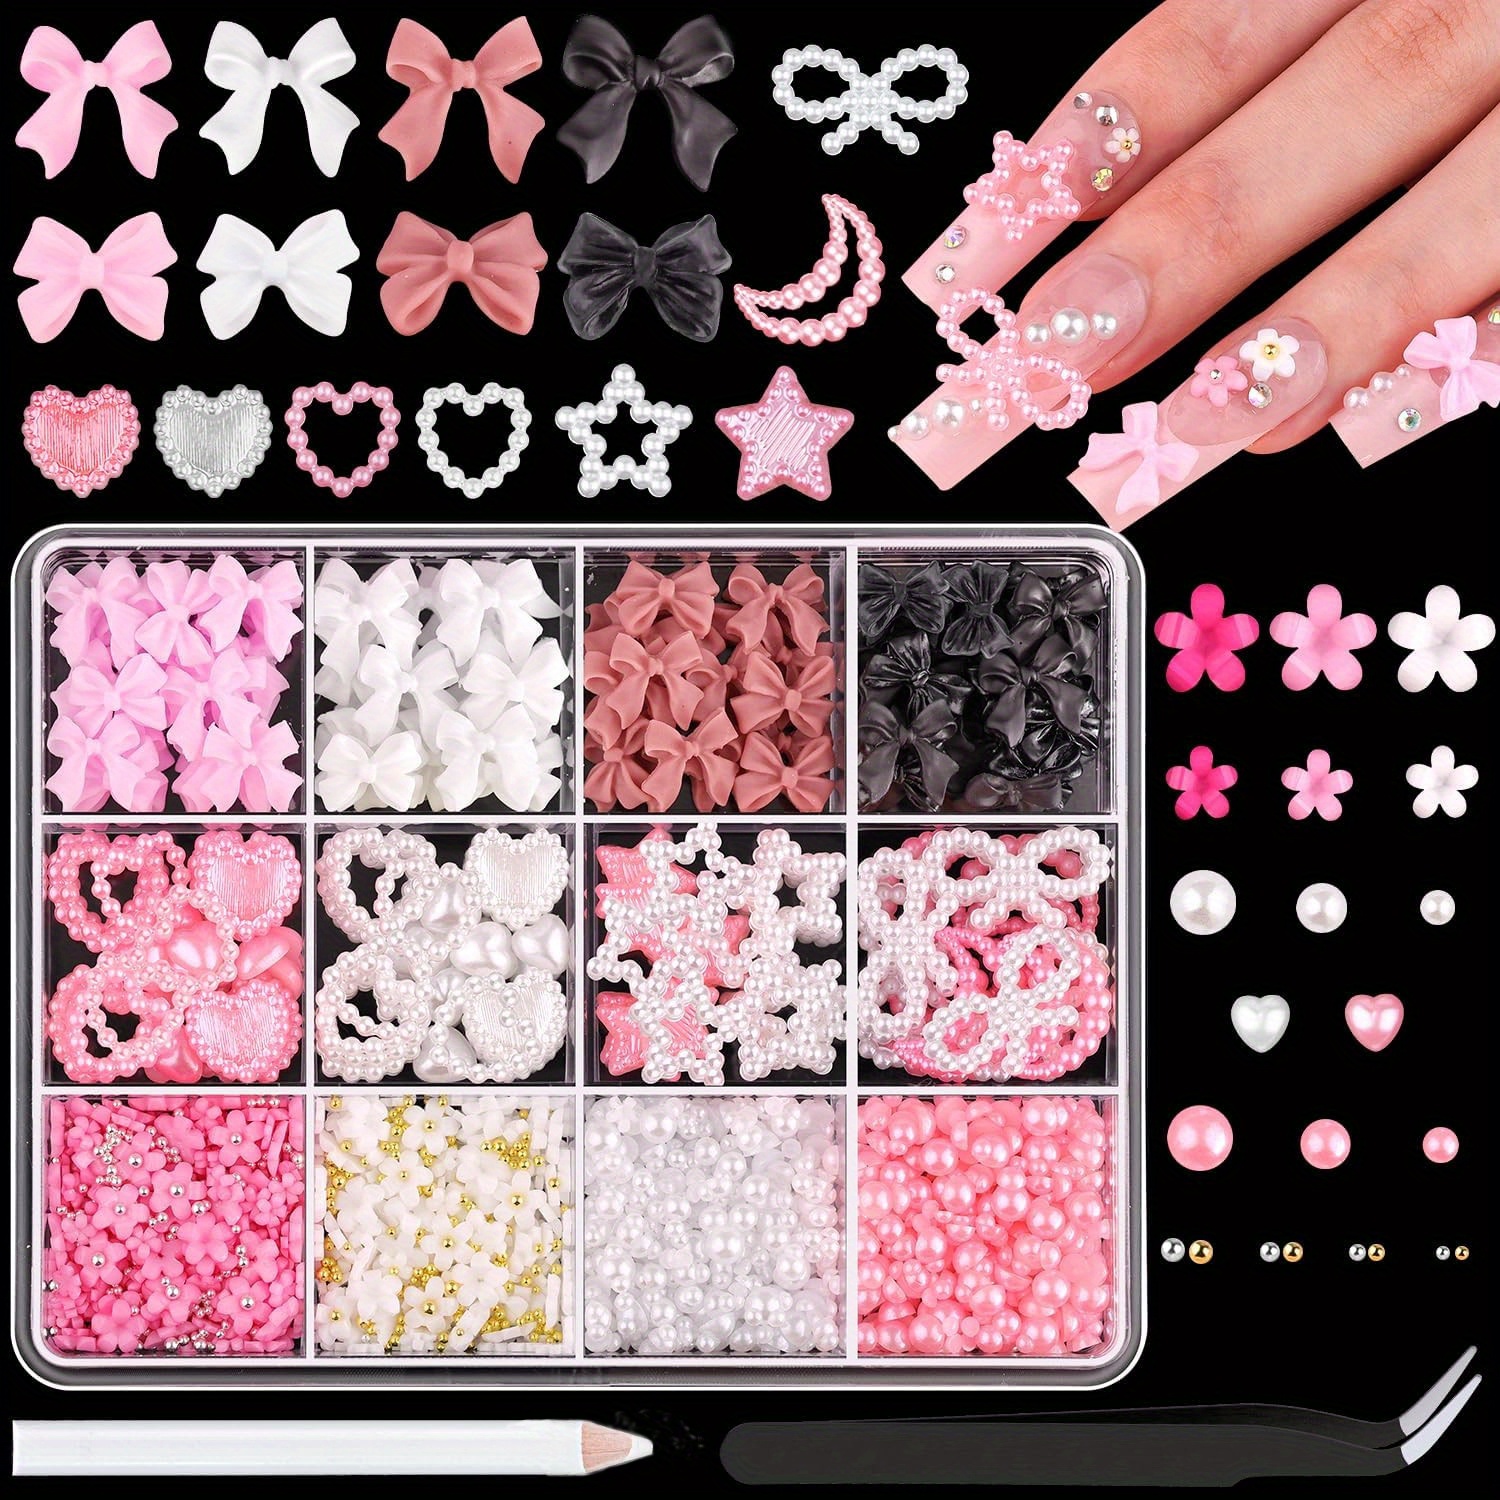 

Kawaii Nail Art Charm Set With Tools, 3d Decorations, Assorted Faux Pearl Bows, Hearts, Stars, Moons, Cute Flowers For Diy Manicure Designs, Includes Pickup Tool